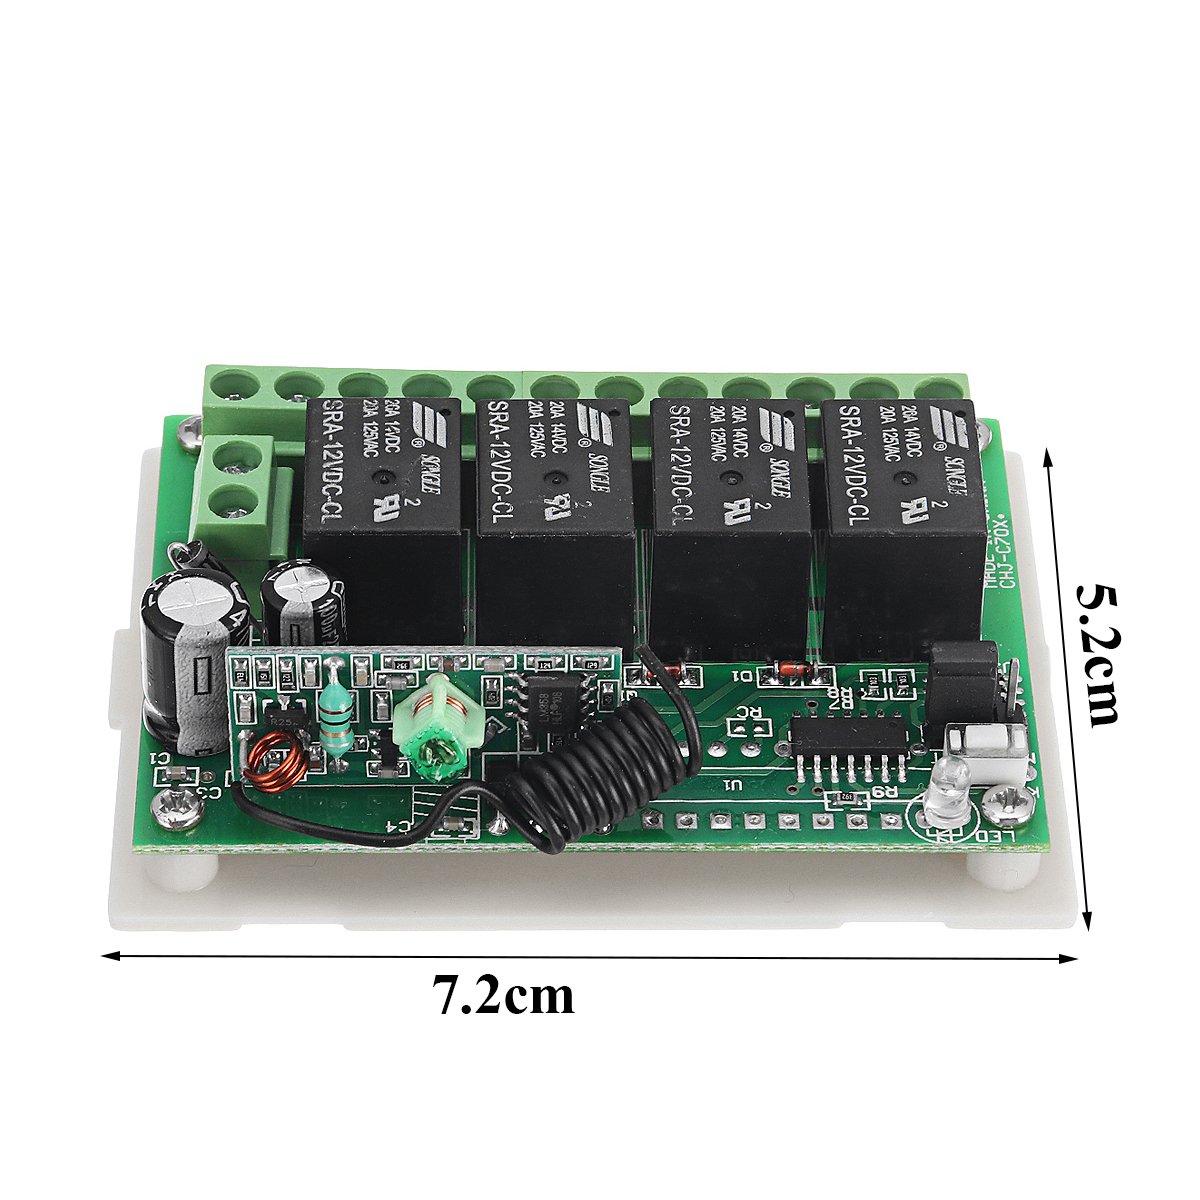 DC12V-4-Transmitter-amp-Receiver-Relay-4CH-433MHz-Wireless-Remote-Control-Light-Switch-1292651